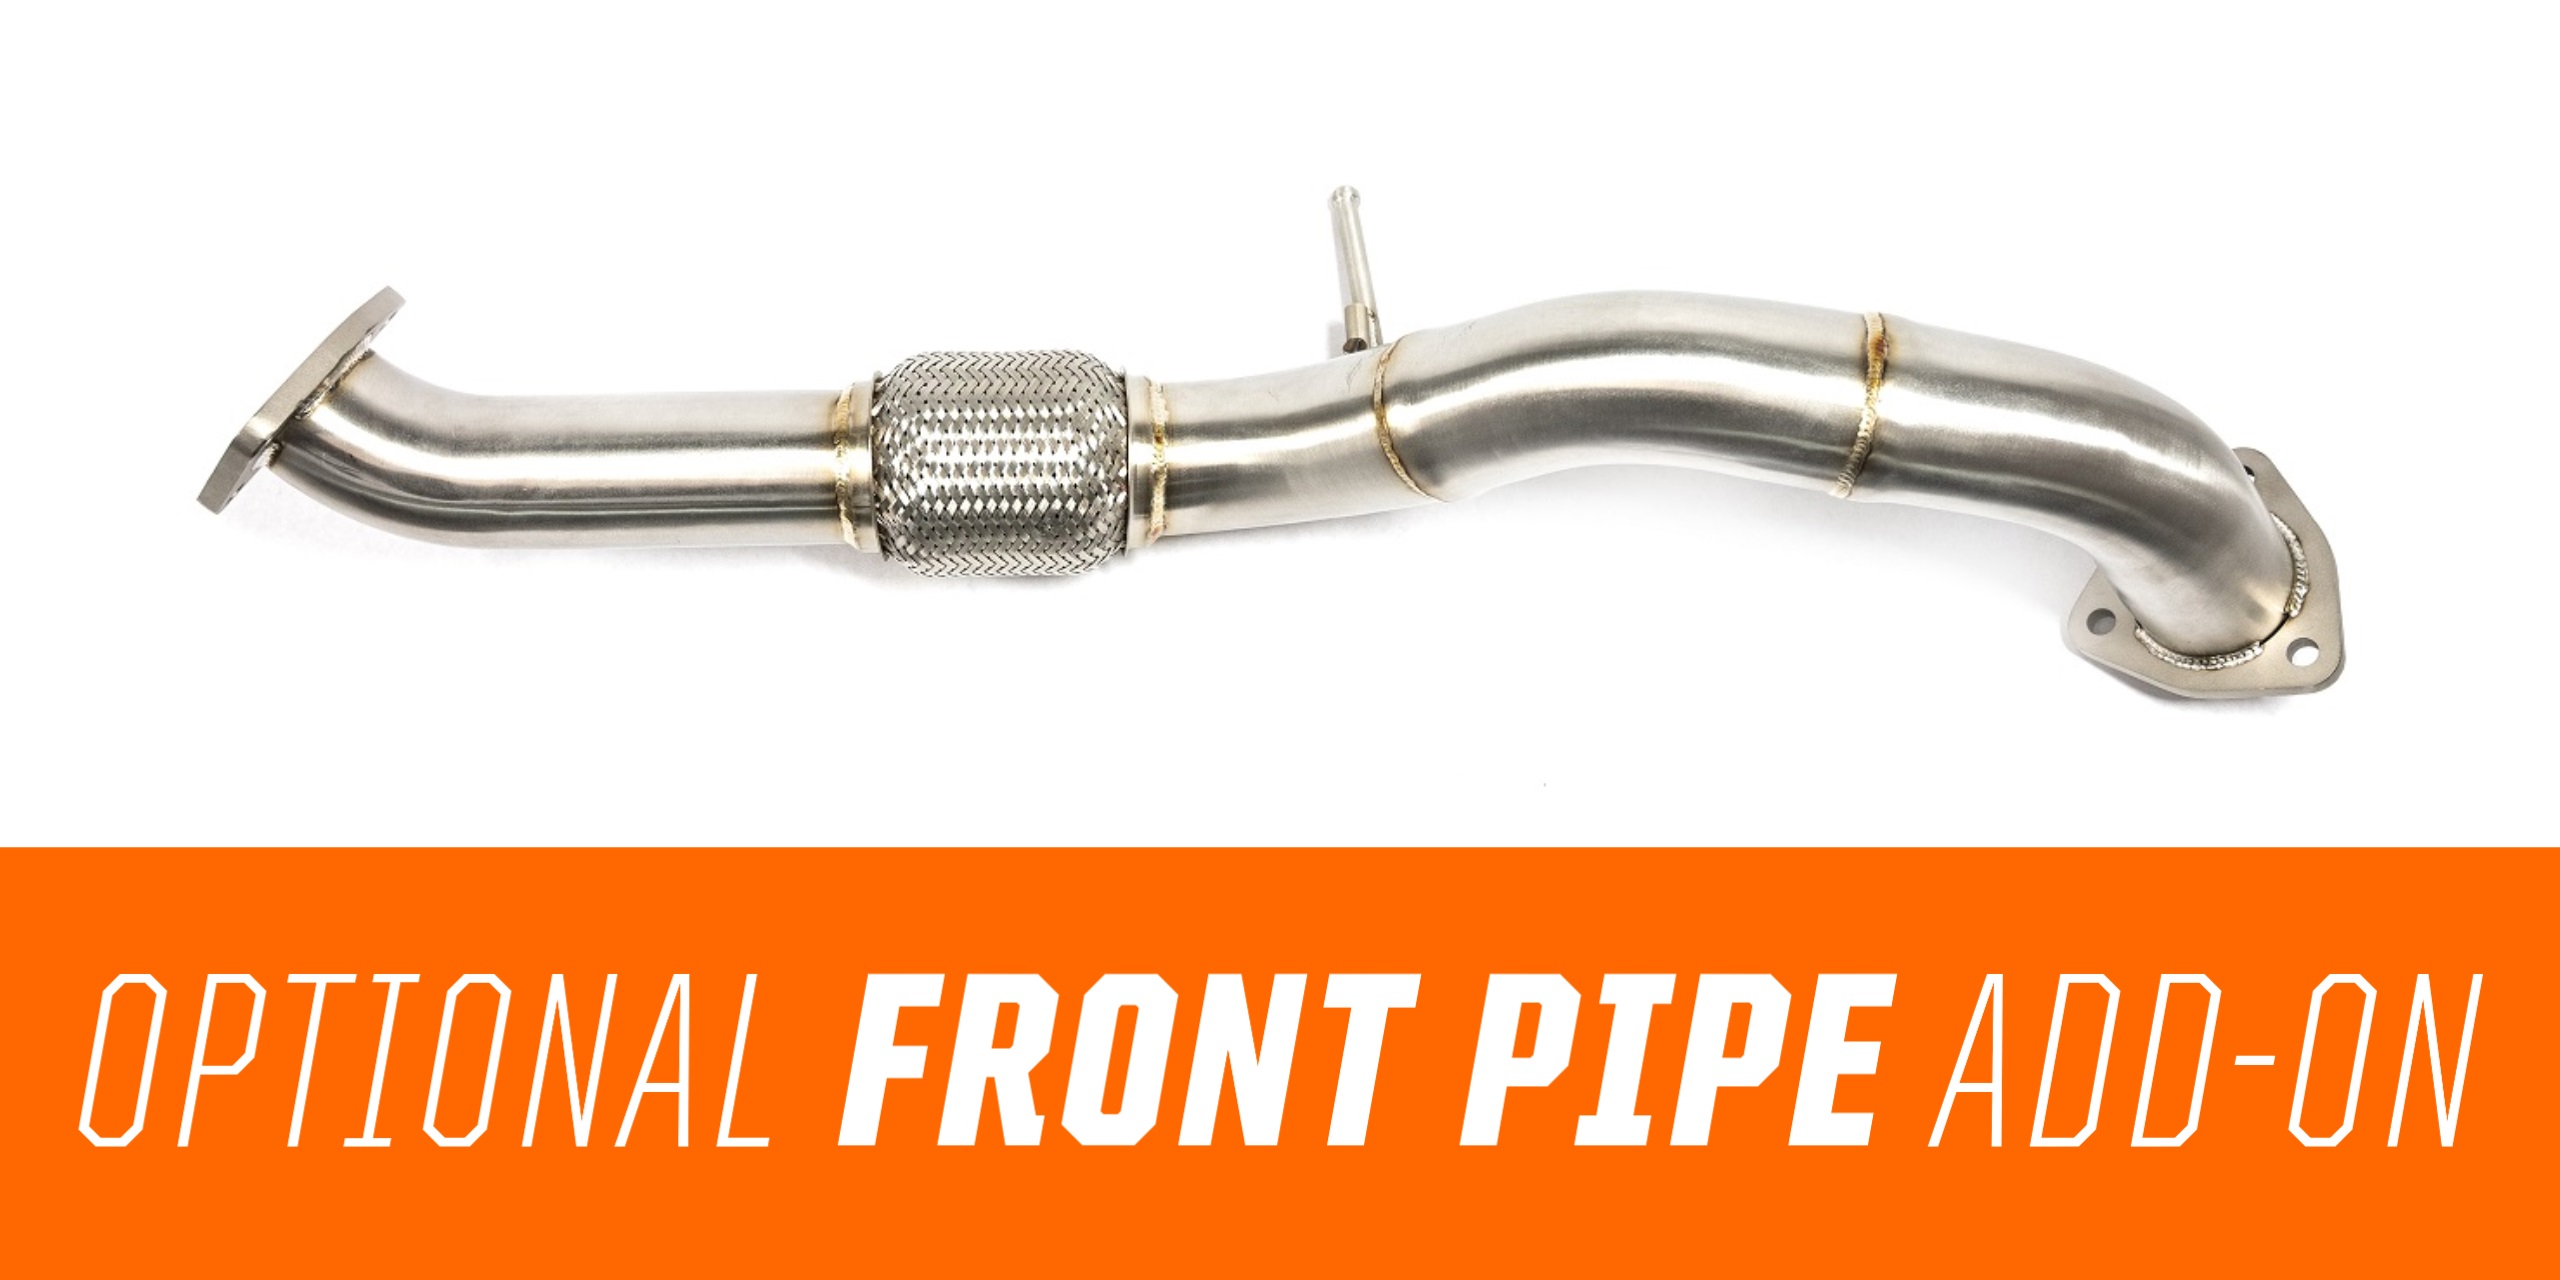 Located after your down-pipe our optional front-pipe will help finish off your system